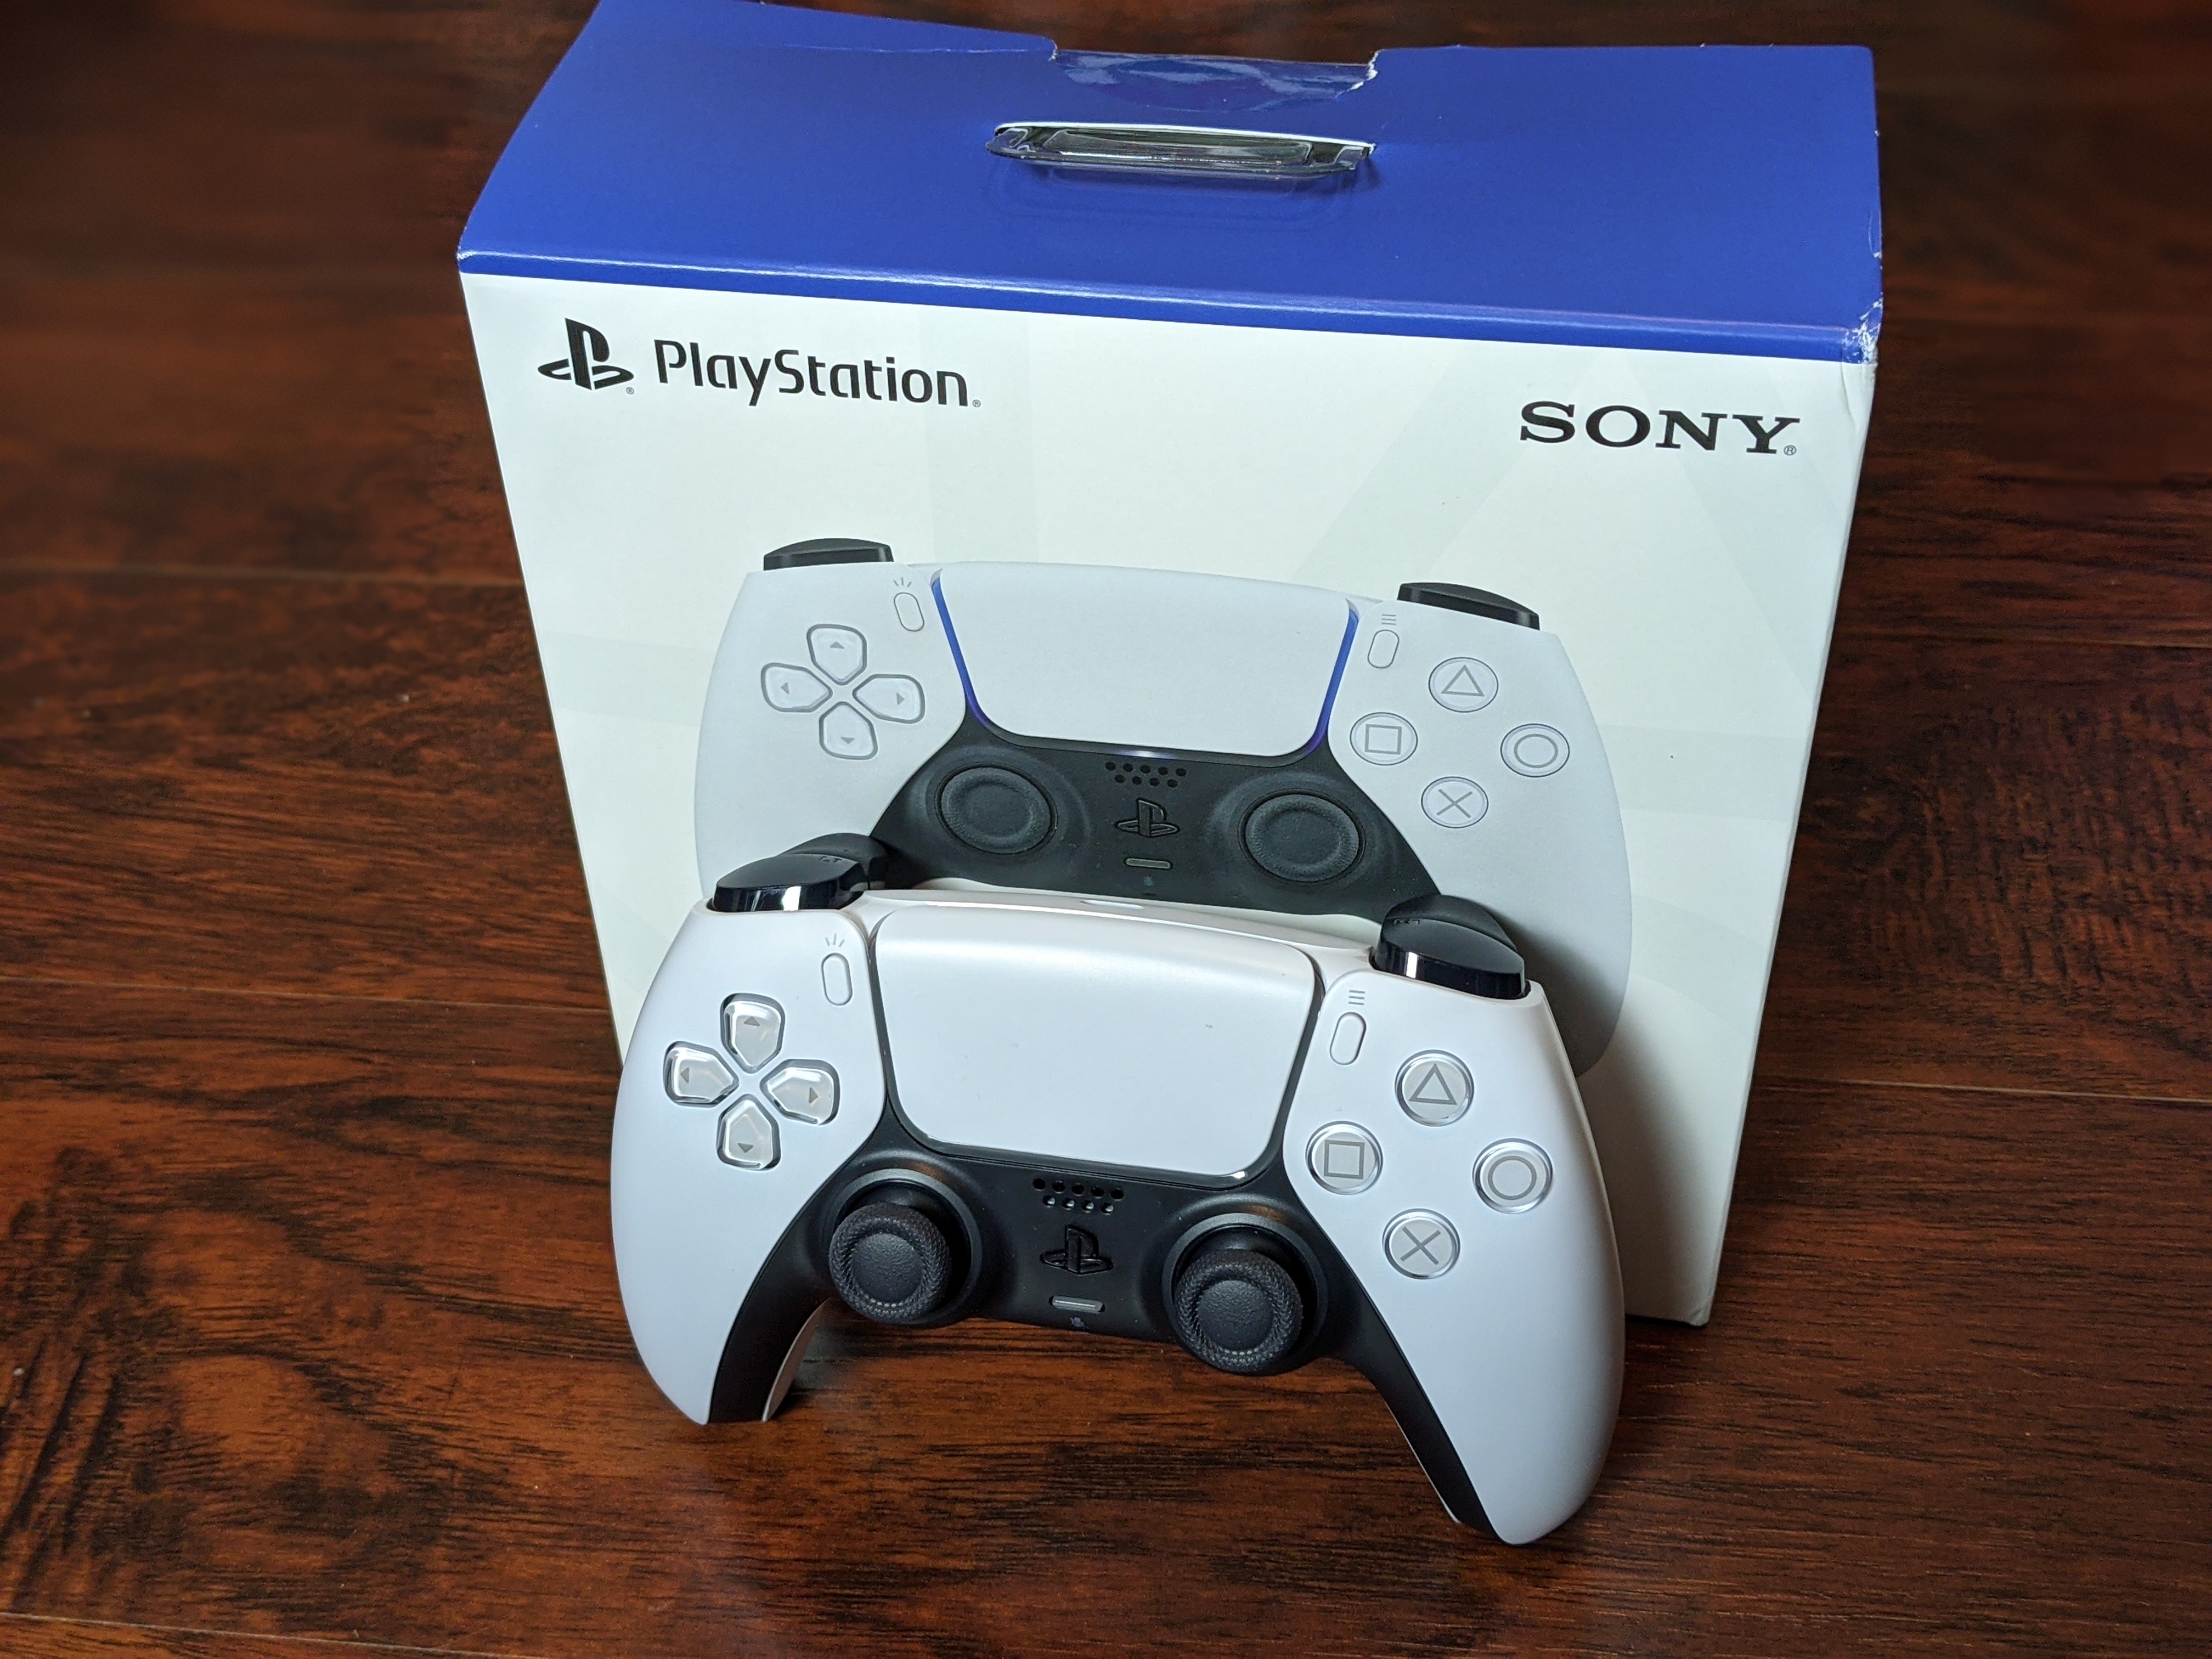 PlayStation 5 unboxing